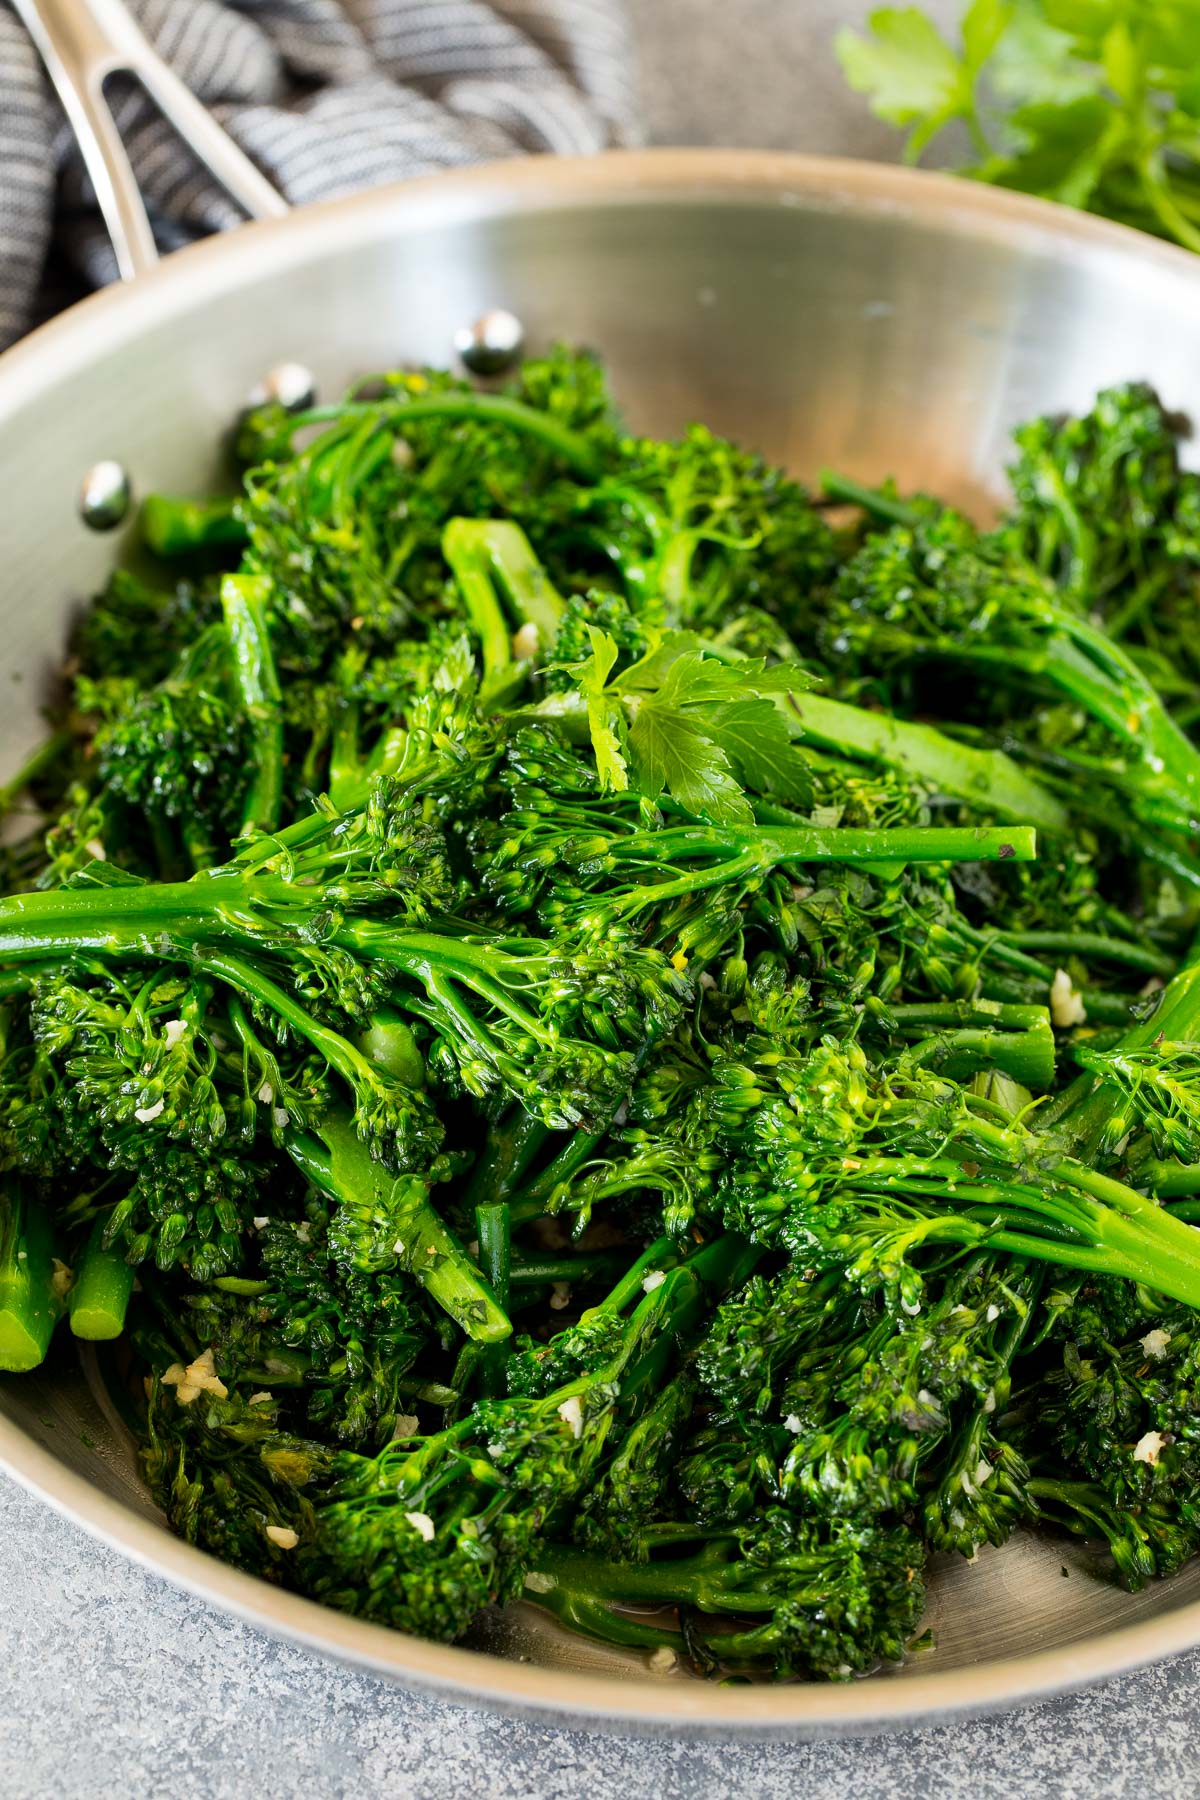 Sauteed broccolini in a pan, topped with parsley.